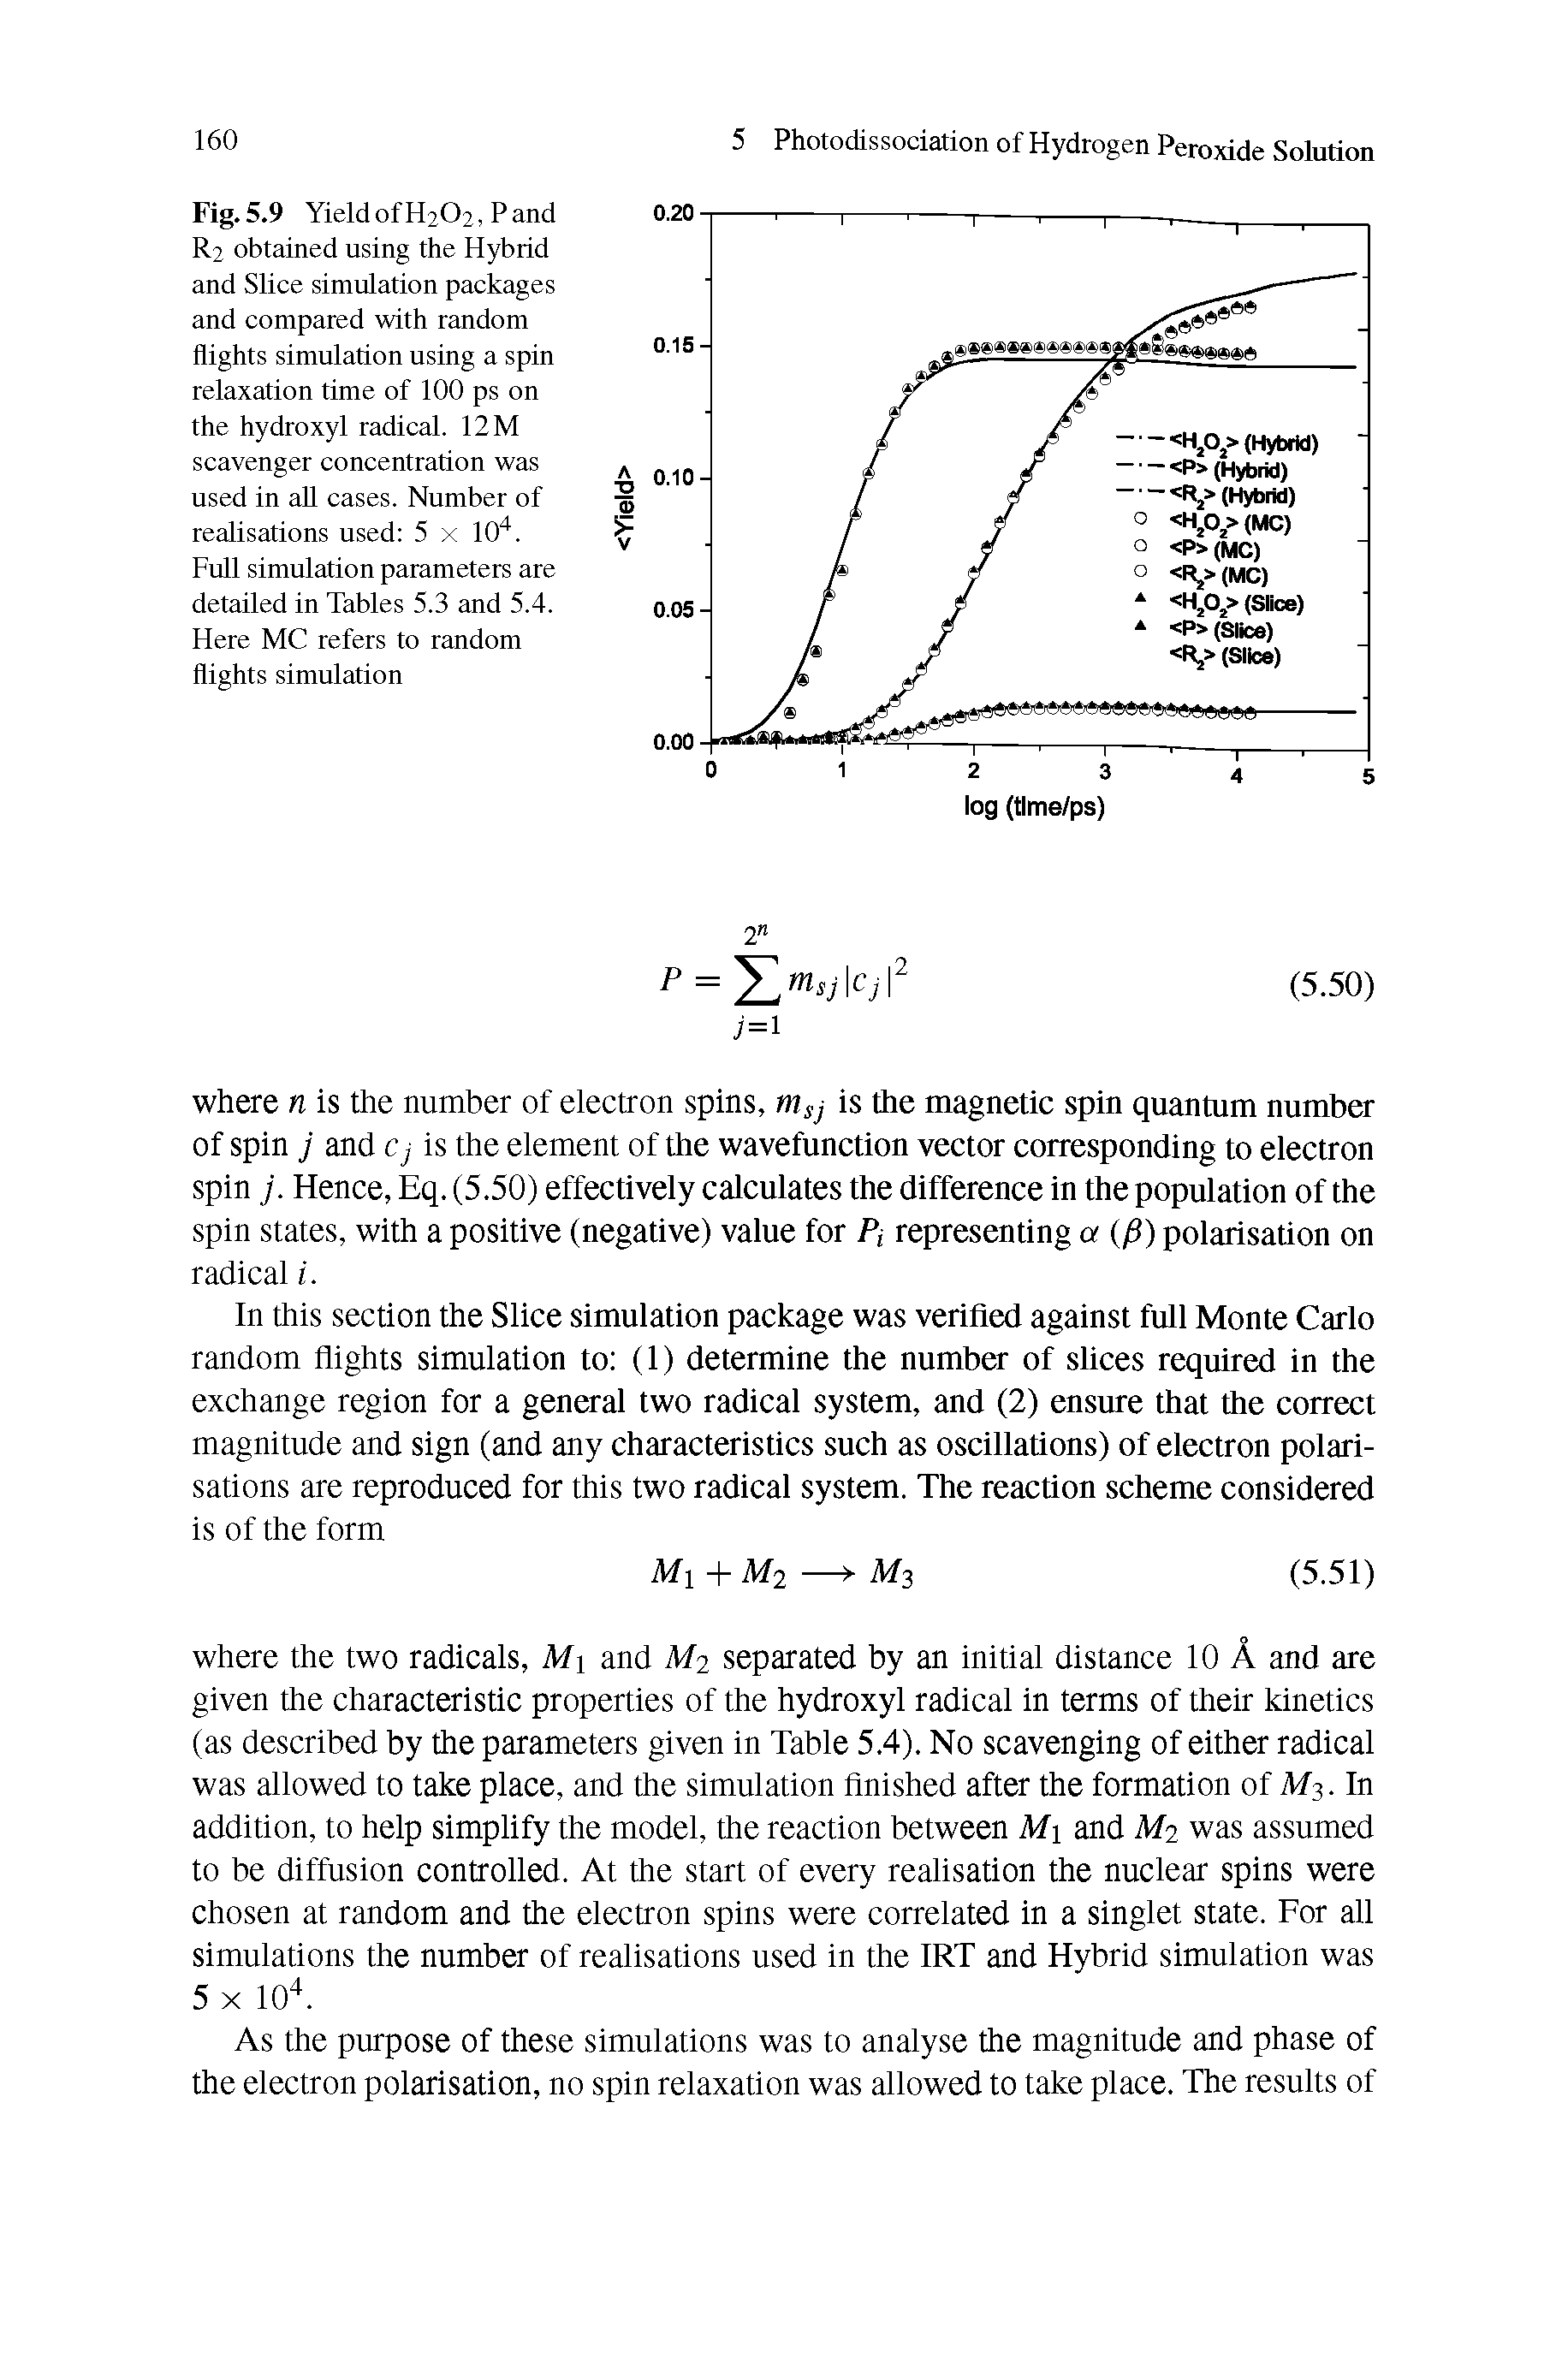 Fig. 5.9 Yield of H2O2, P and R2 obtained using the Hybrid and Slice simulation packages and compared with random flights simulation using a spin relaxation time of 100 ps on the hydroxyl radical. 12 M scavenger concentration was used in aU cases. Number of realisations used 5 x 10. Full simulation parameters are detailed in Tables 5.3 and 5.4. Here MC refers to random flights simulation...